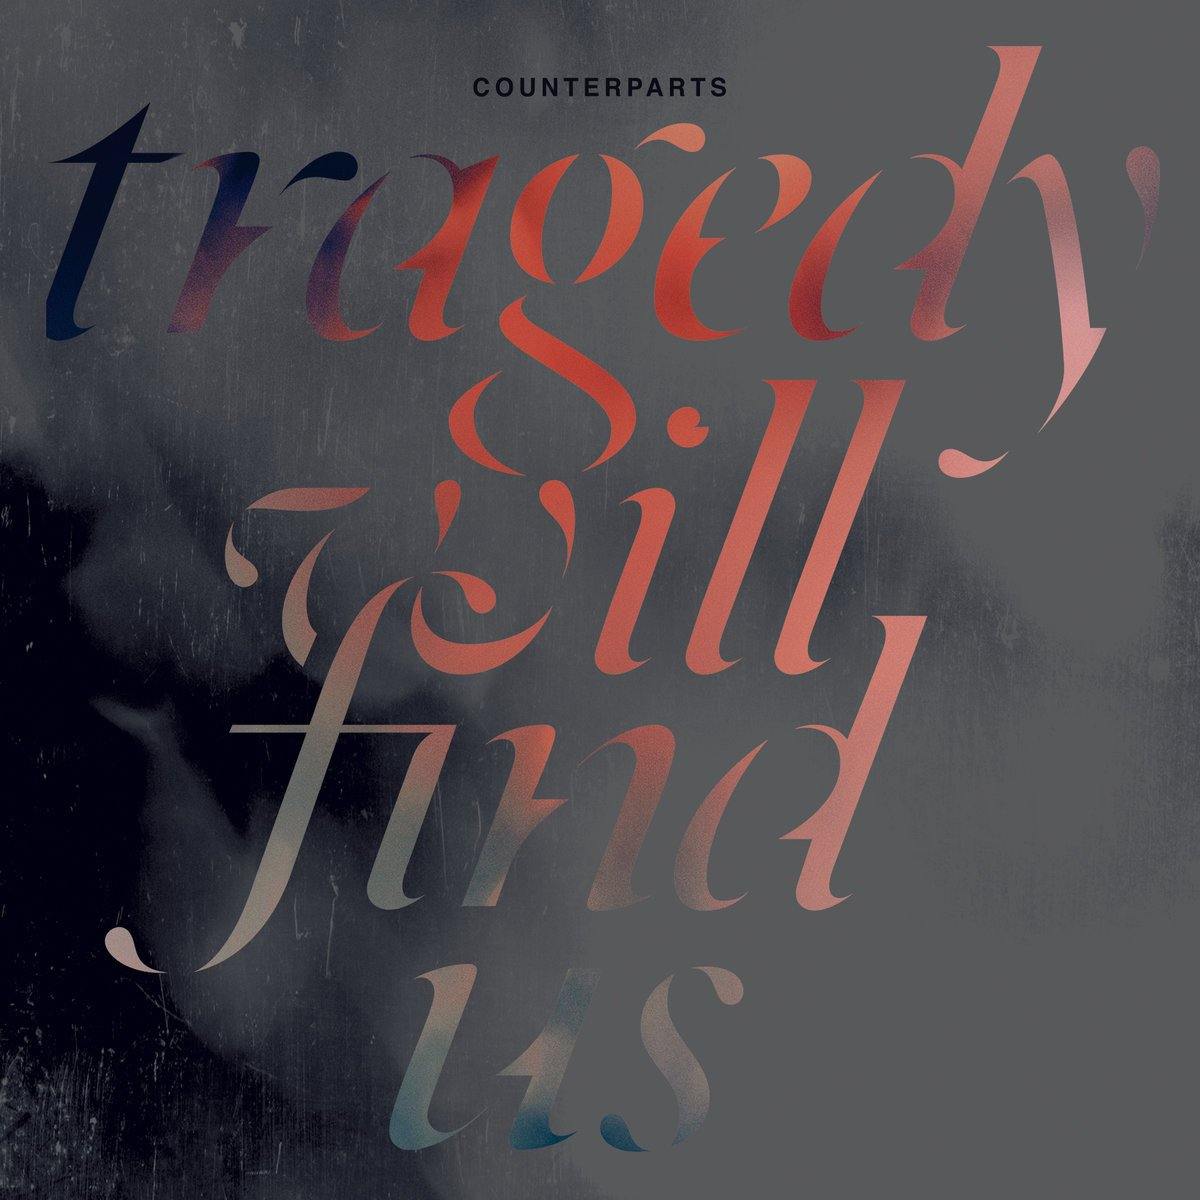 Buy – Counterparts "Tragedy Will Find Us" 12" – Band & Music Merch – Cold Cuts Merch